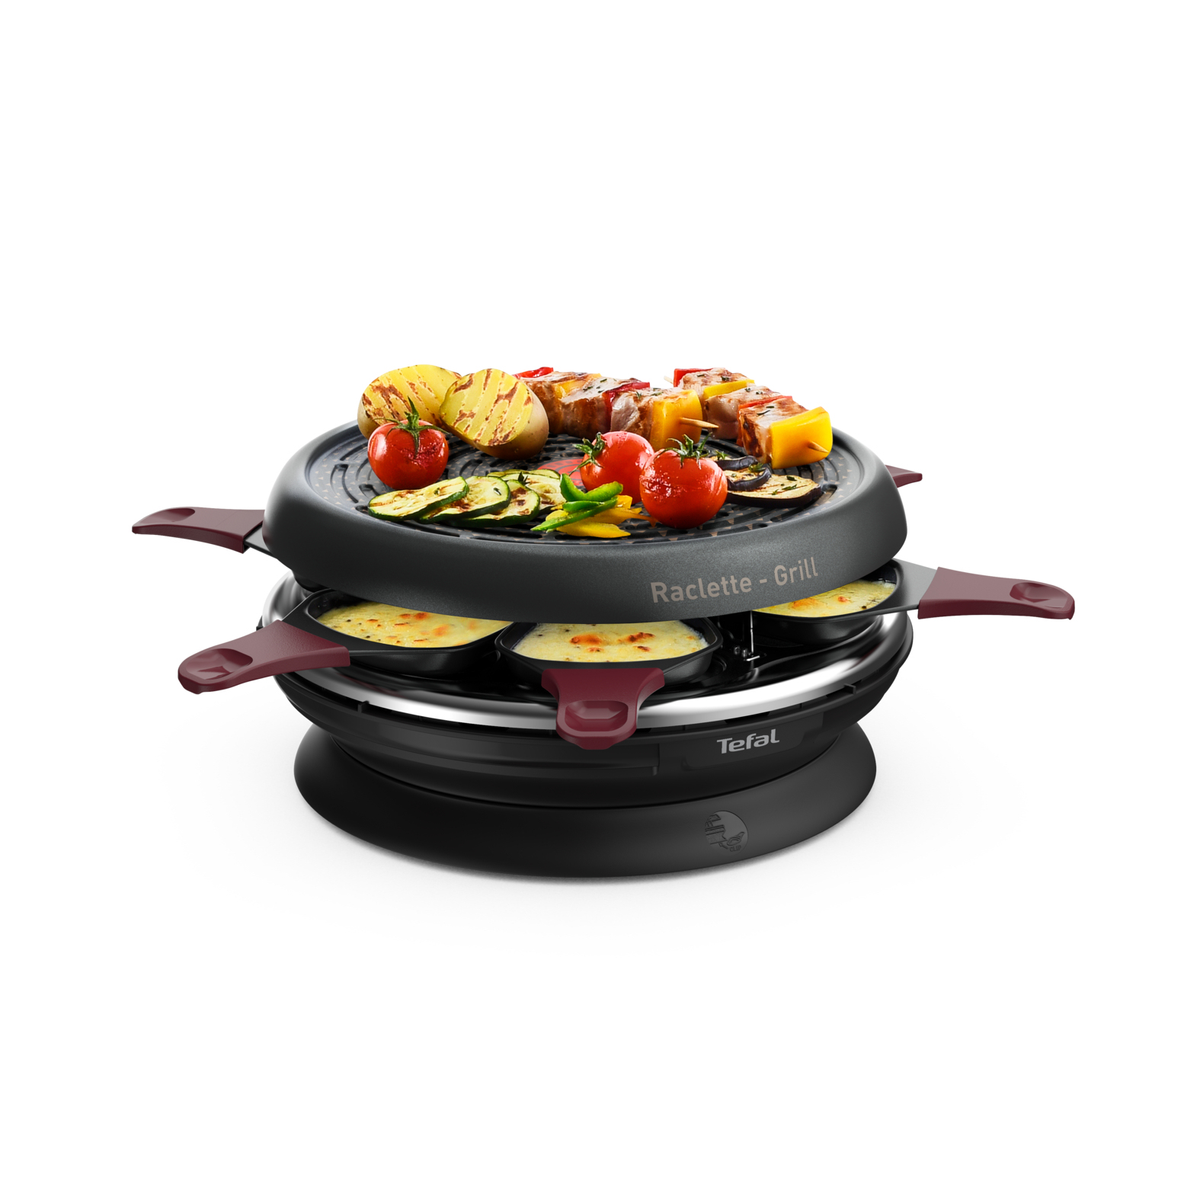 TEFAL RE 1820 RACLETTE-GRILL Raclette INVENT NEO